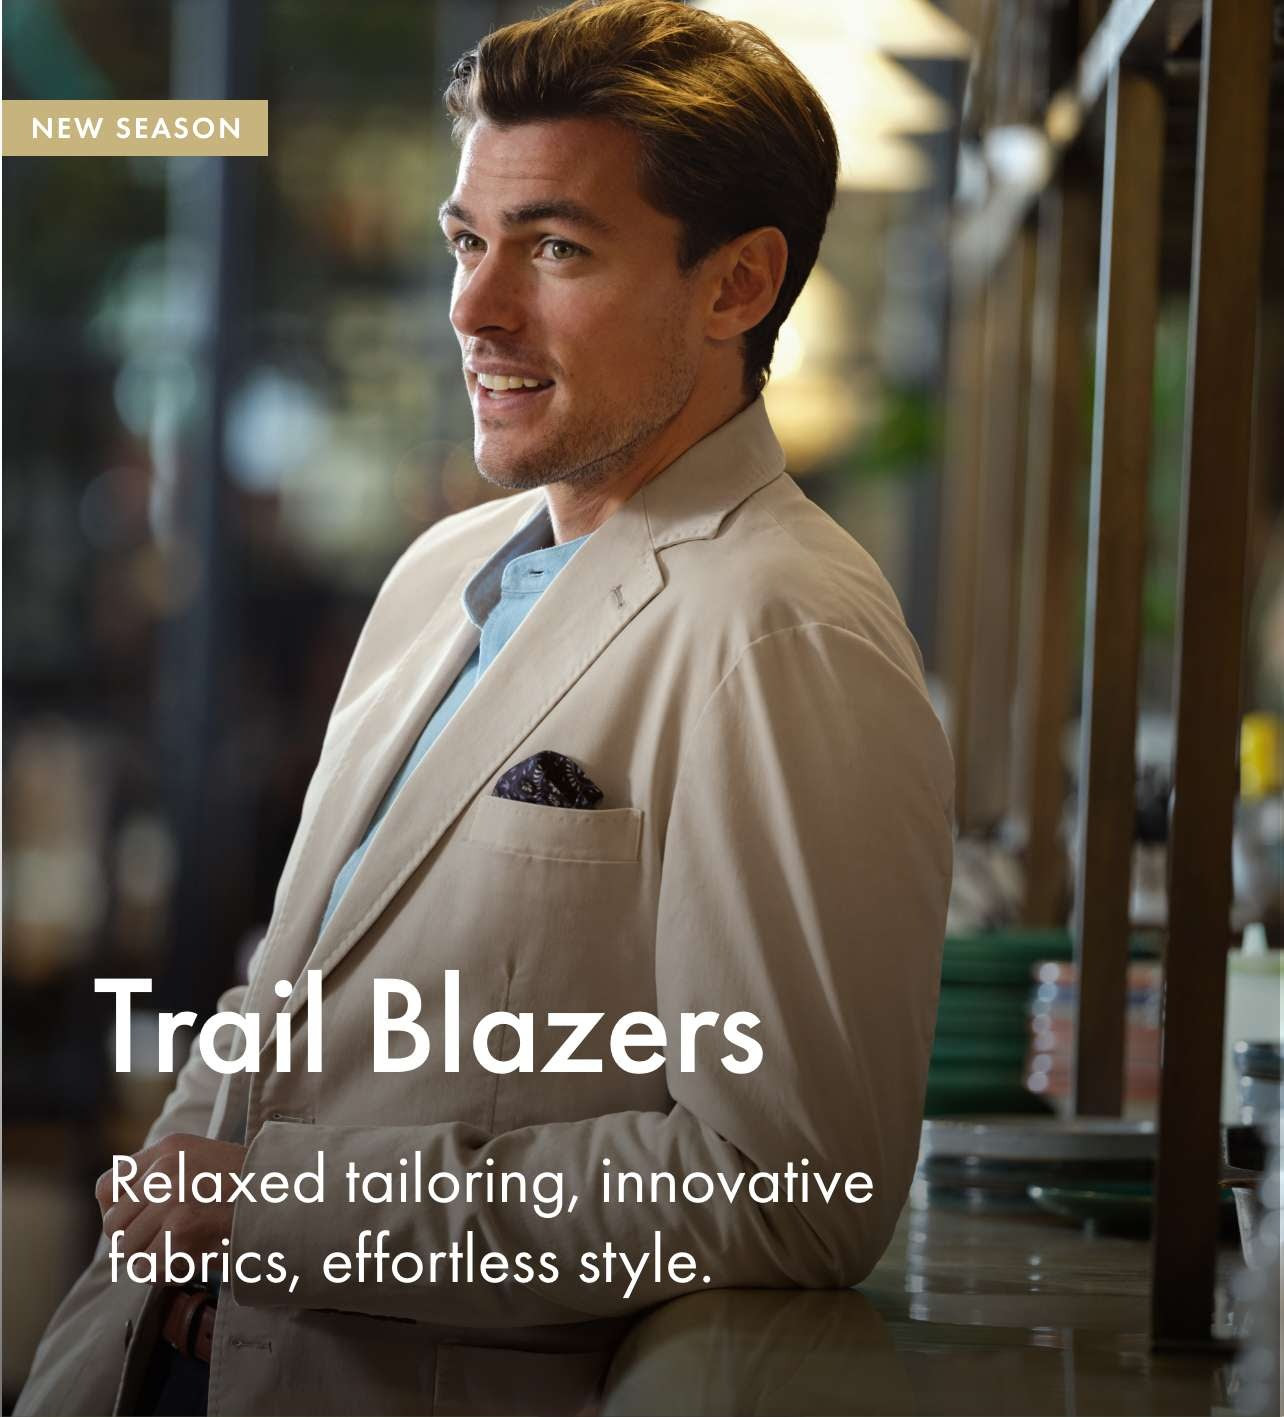 Trail Blazers. Relaxed tailoring, innovative fabrics, effortless style.